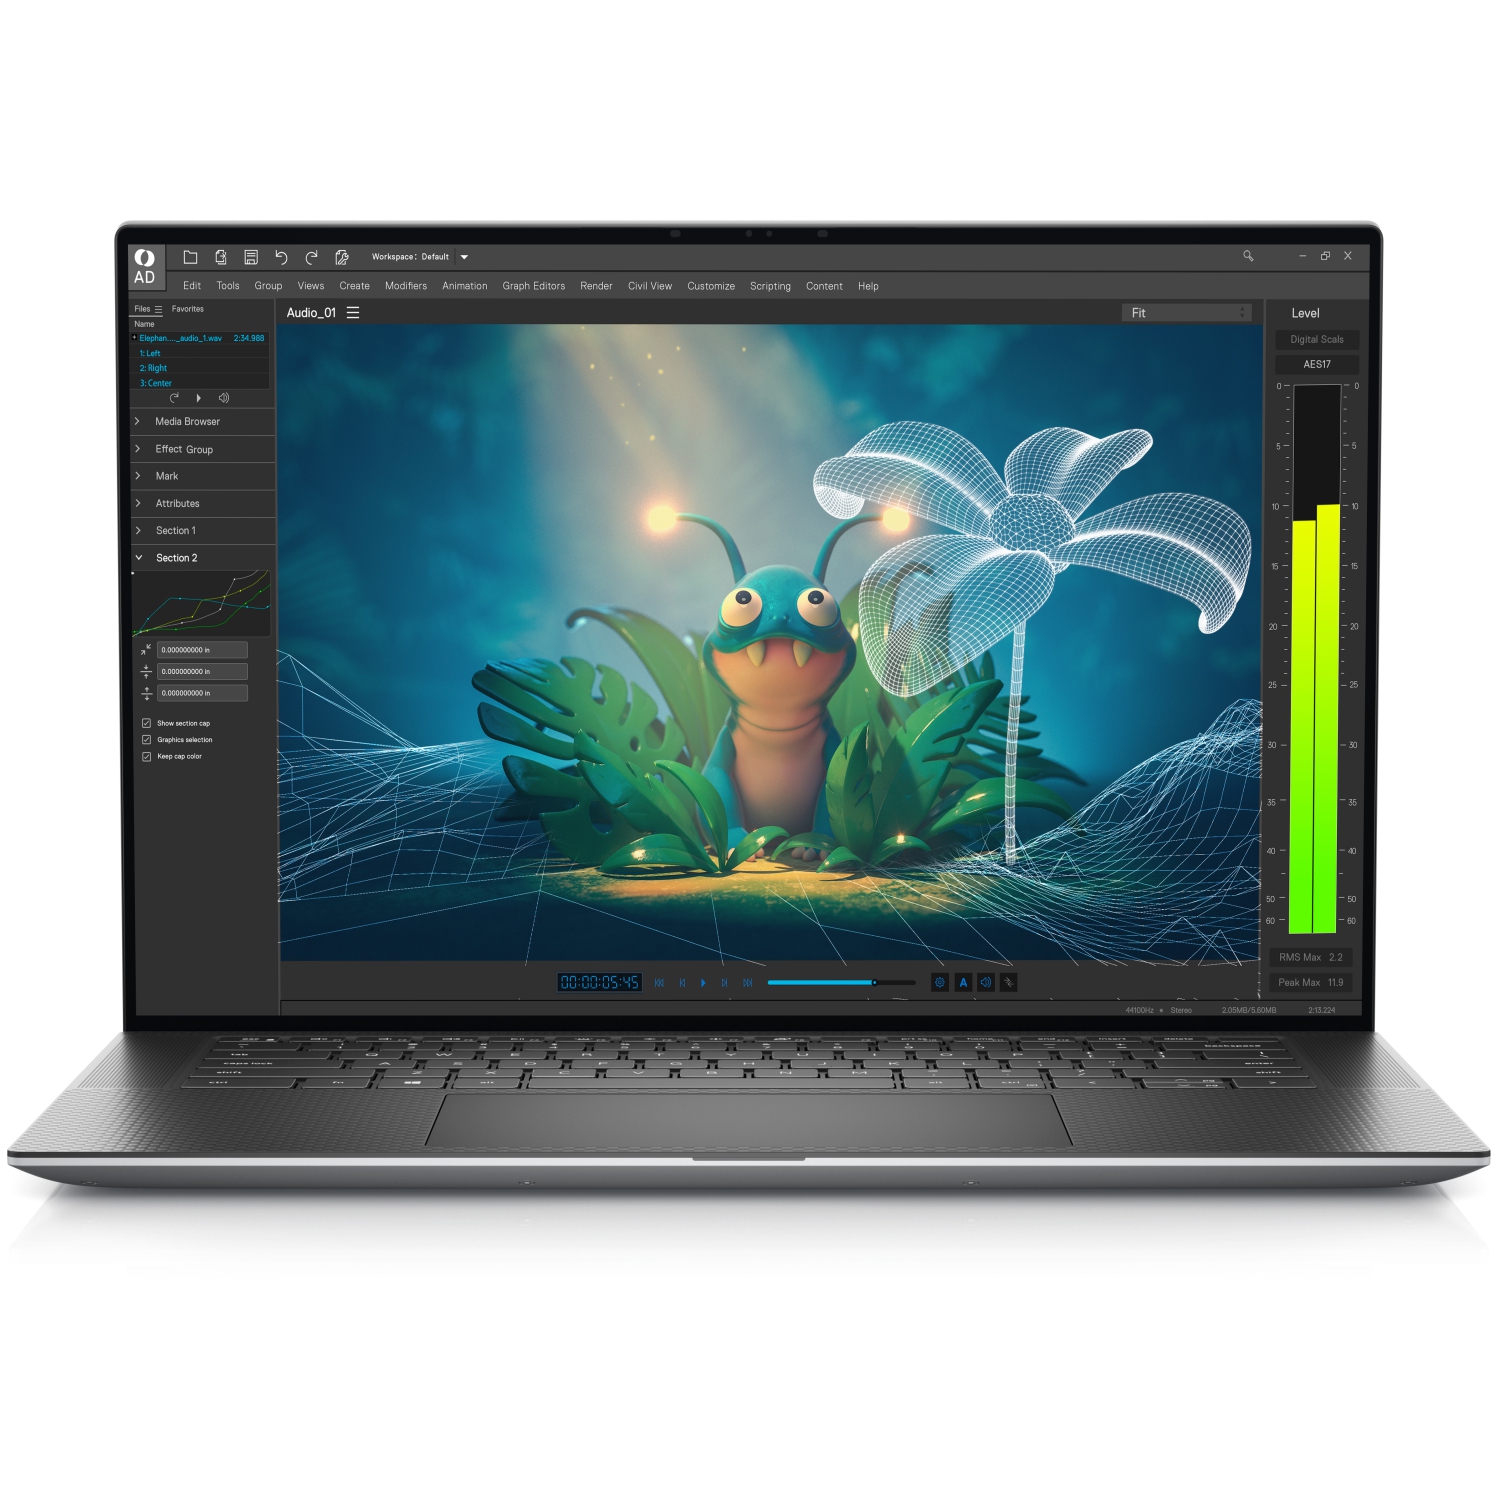 Refurbished (Excellent) – Dell Precision 5000 5570 Workstation Laptop (2022) | 15.6" 4K Touch | Core i7 - 2TB SSD - 32GB RAM - RTX A1000 | 14 Cores @ 4.8 GHz - 12th Gen CPU